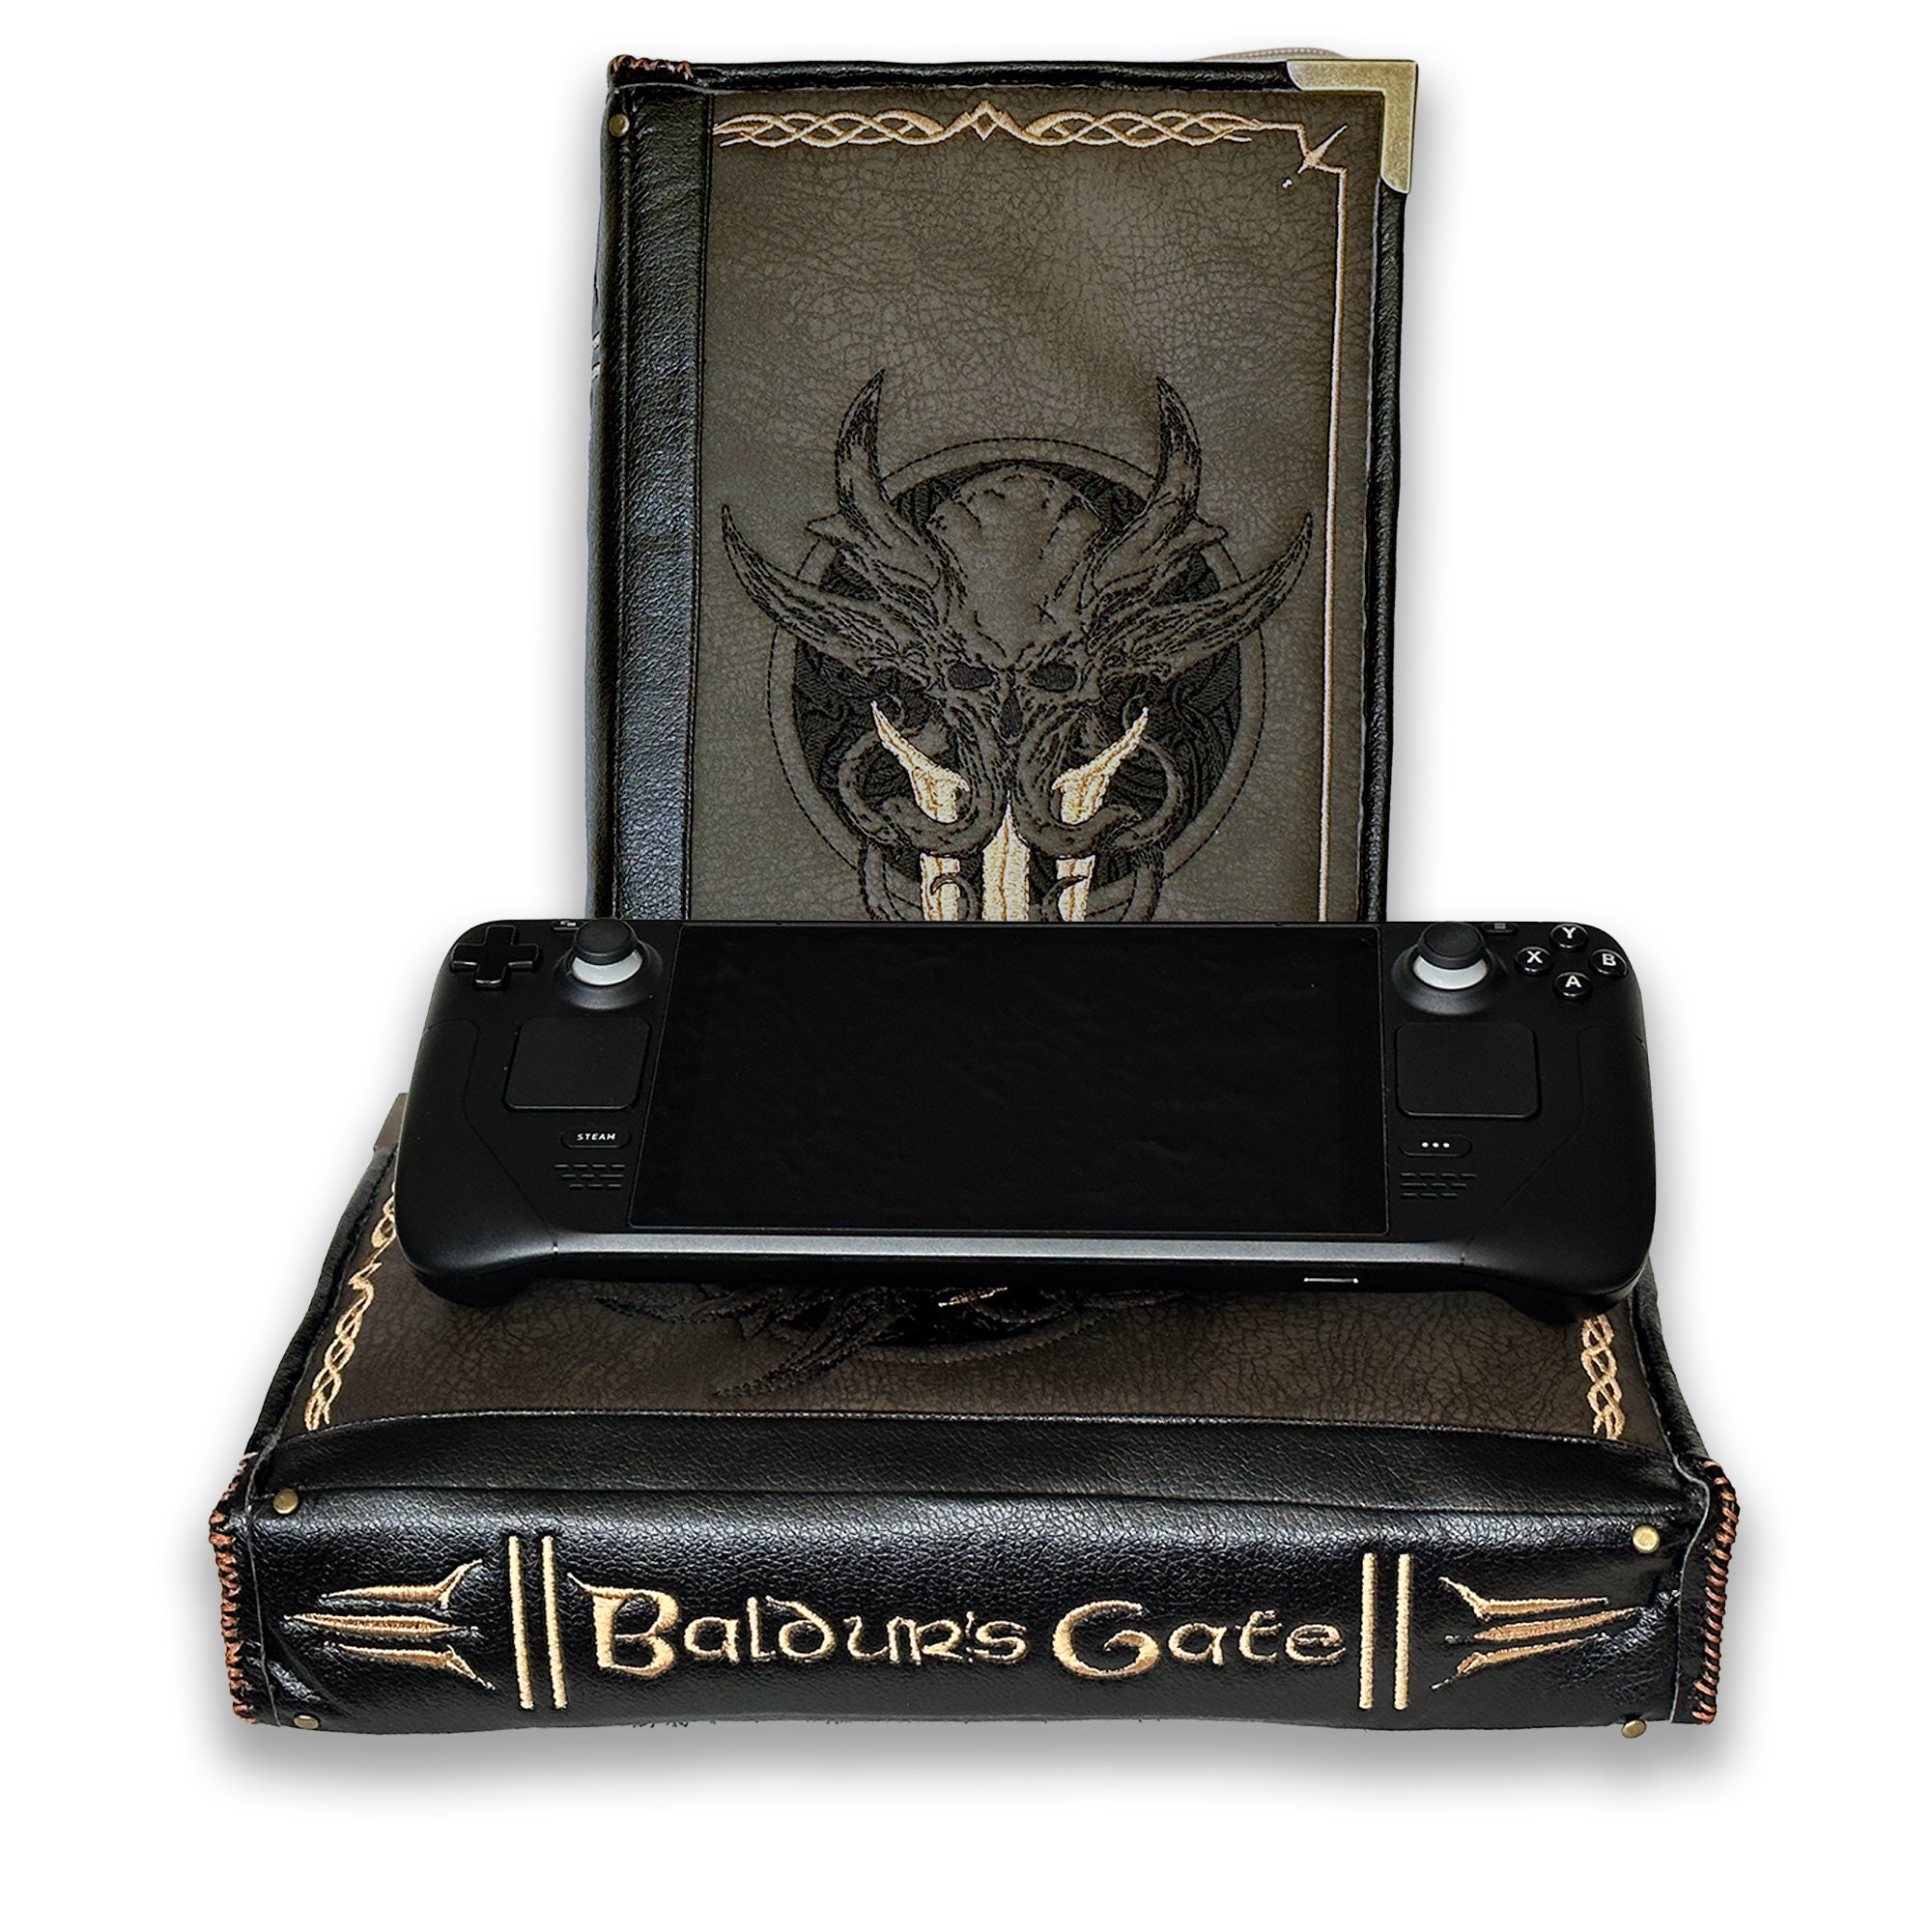 Magcase 2.0 MDF Magnetic Carrying Case / Display Case for Miniatures / Miniature  Storage Designed for Warhammer 40k, Aos, Dnd, and More 